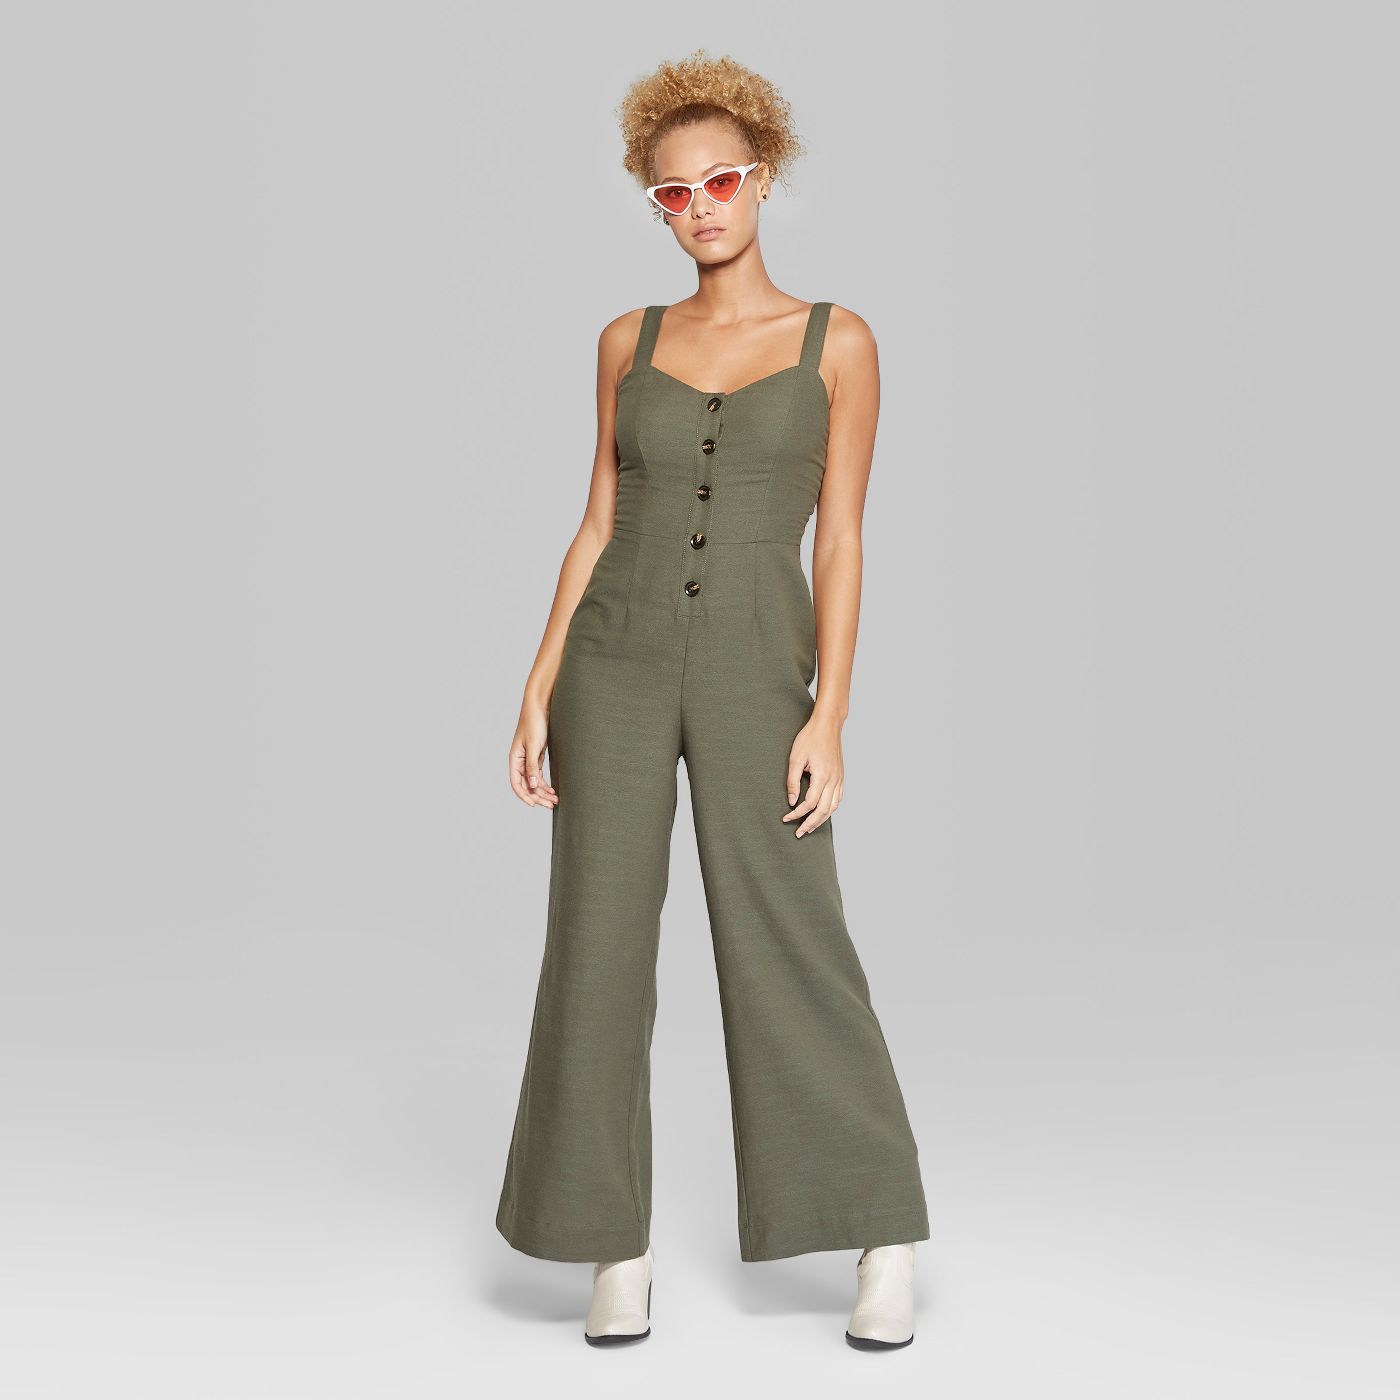 Women's Strappy Button Front Tie Back Jumpsuit - Wild Fable™ - image 2 of 10